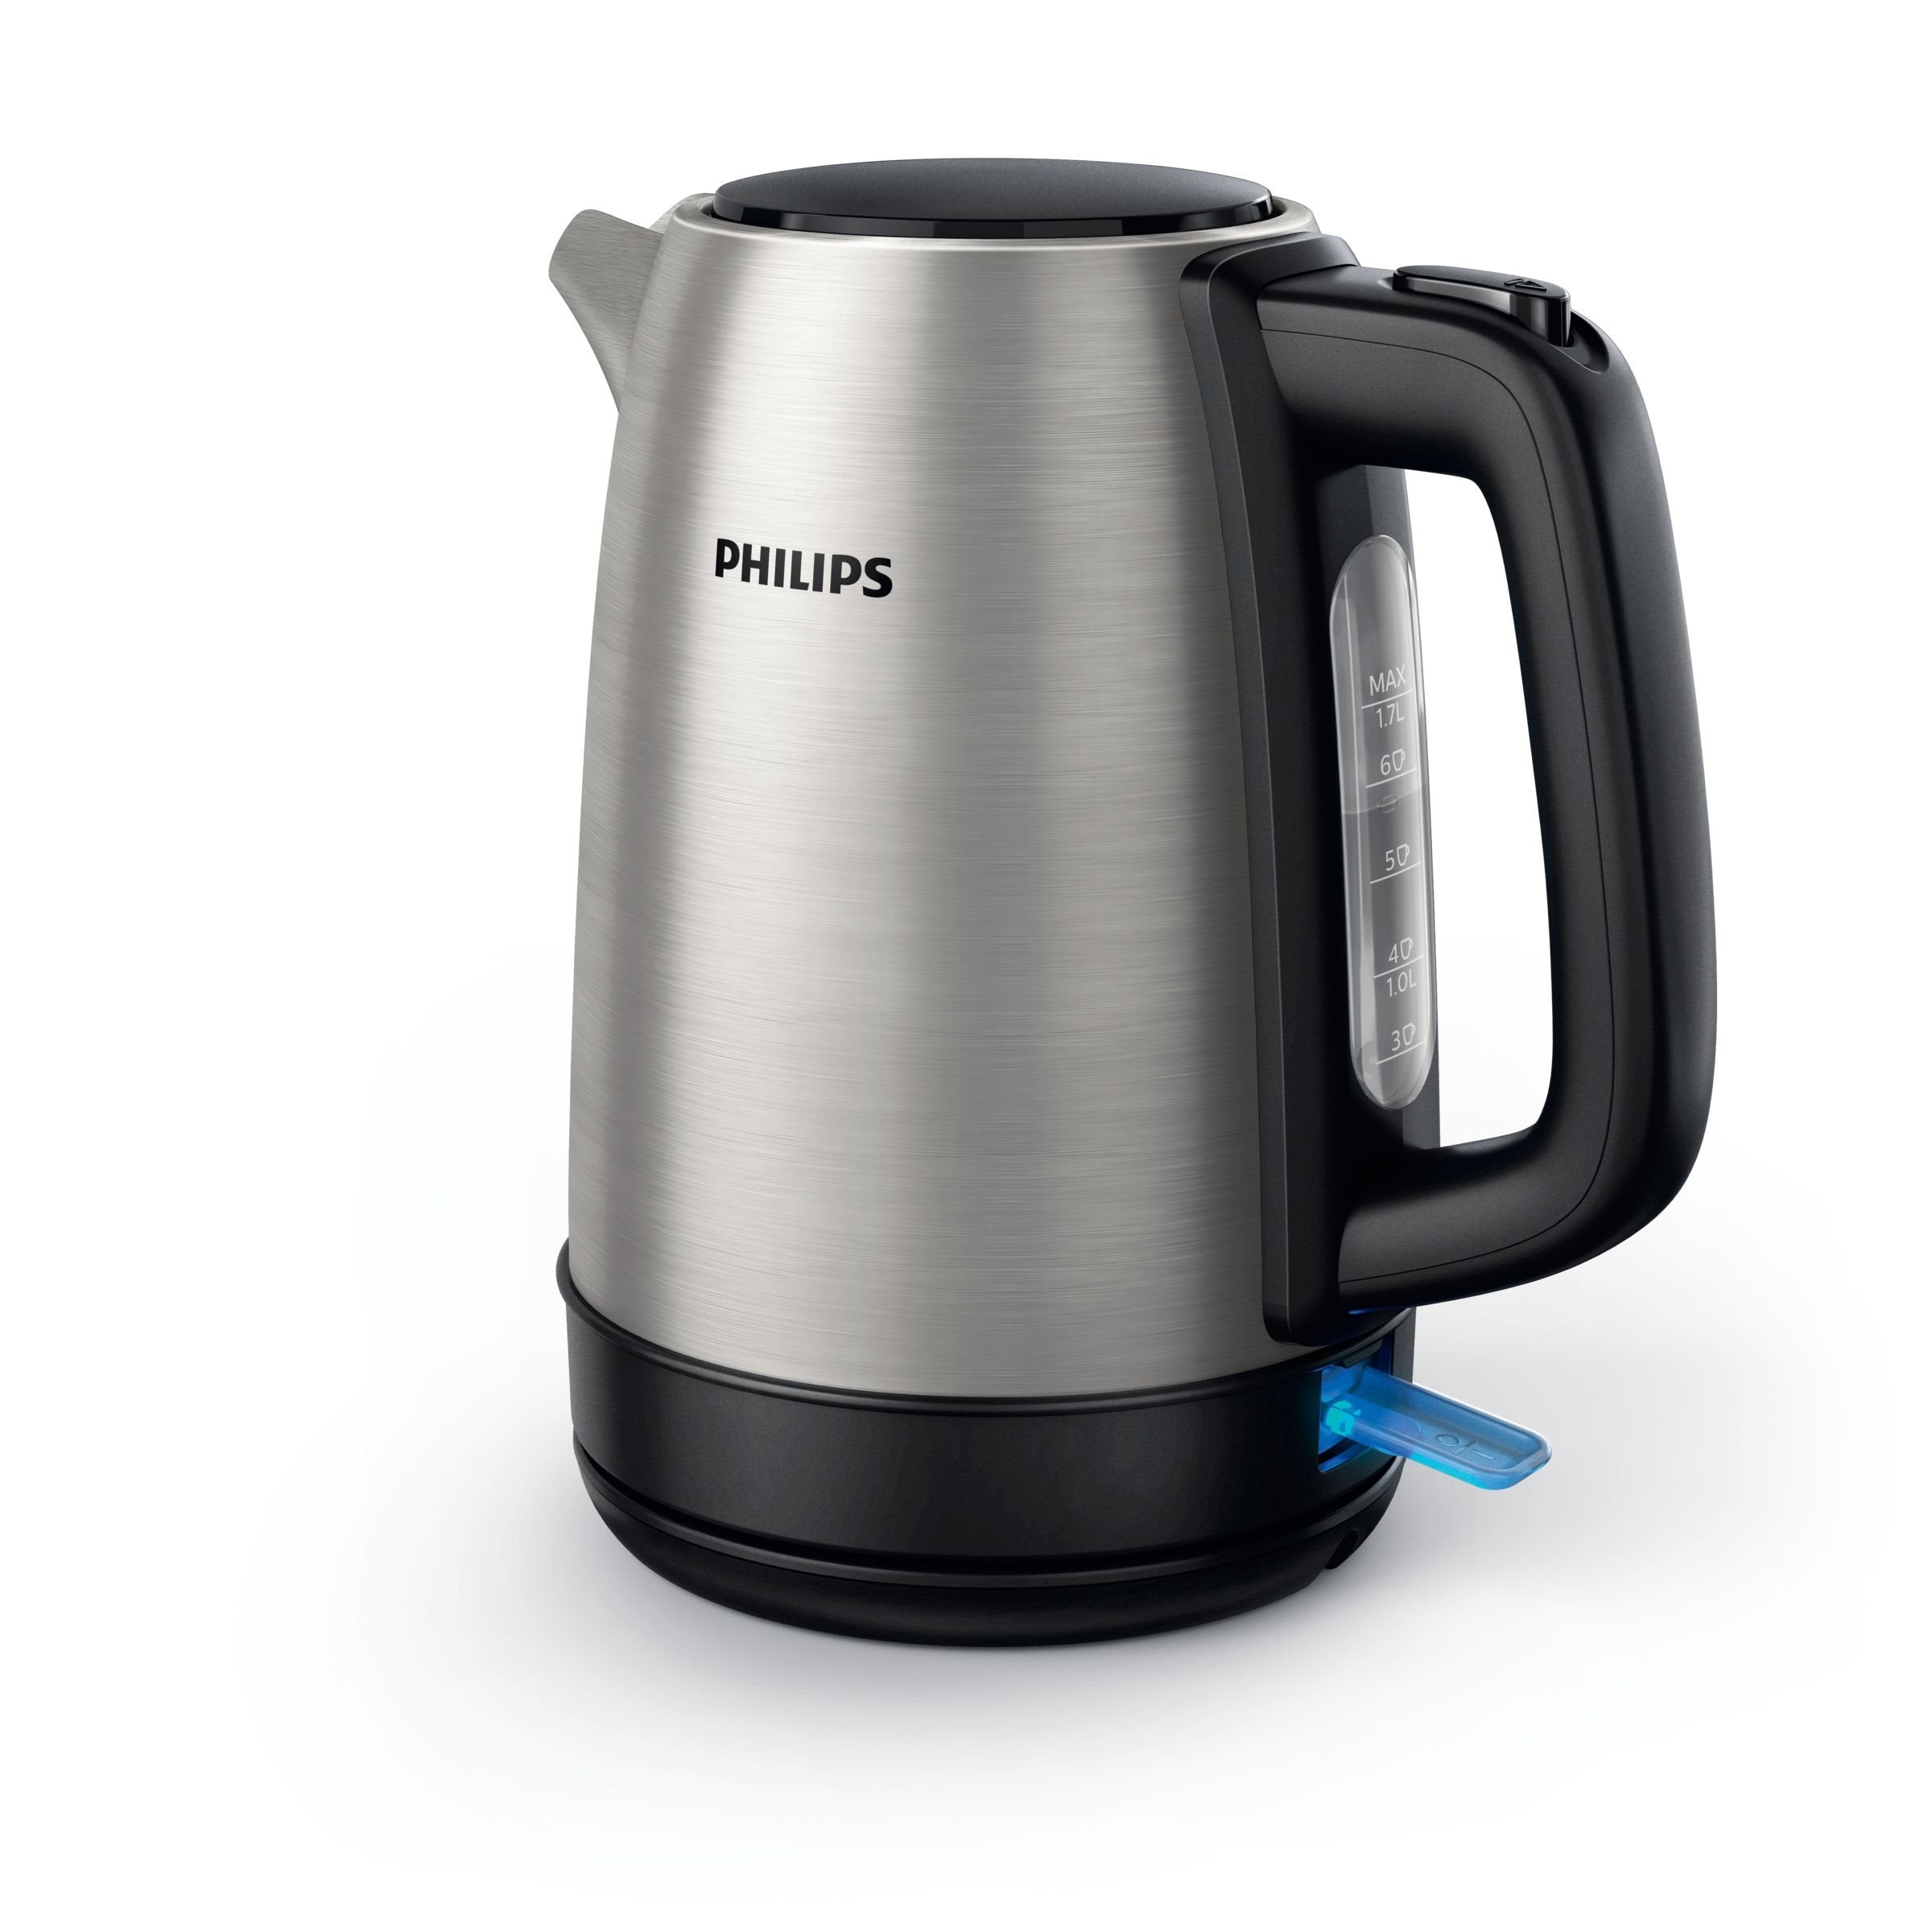 PHILIPS Electric Kettle With Spring Lid and Indicator Light Pirouette Base, Stainless Steel, 1.7L Capacity (HD9350/92)